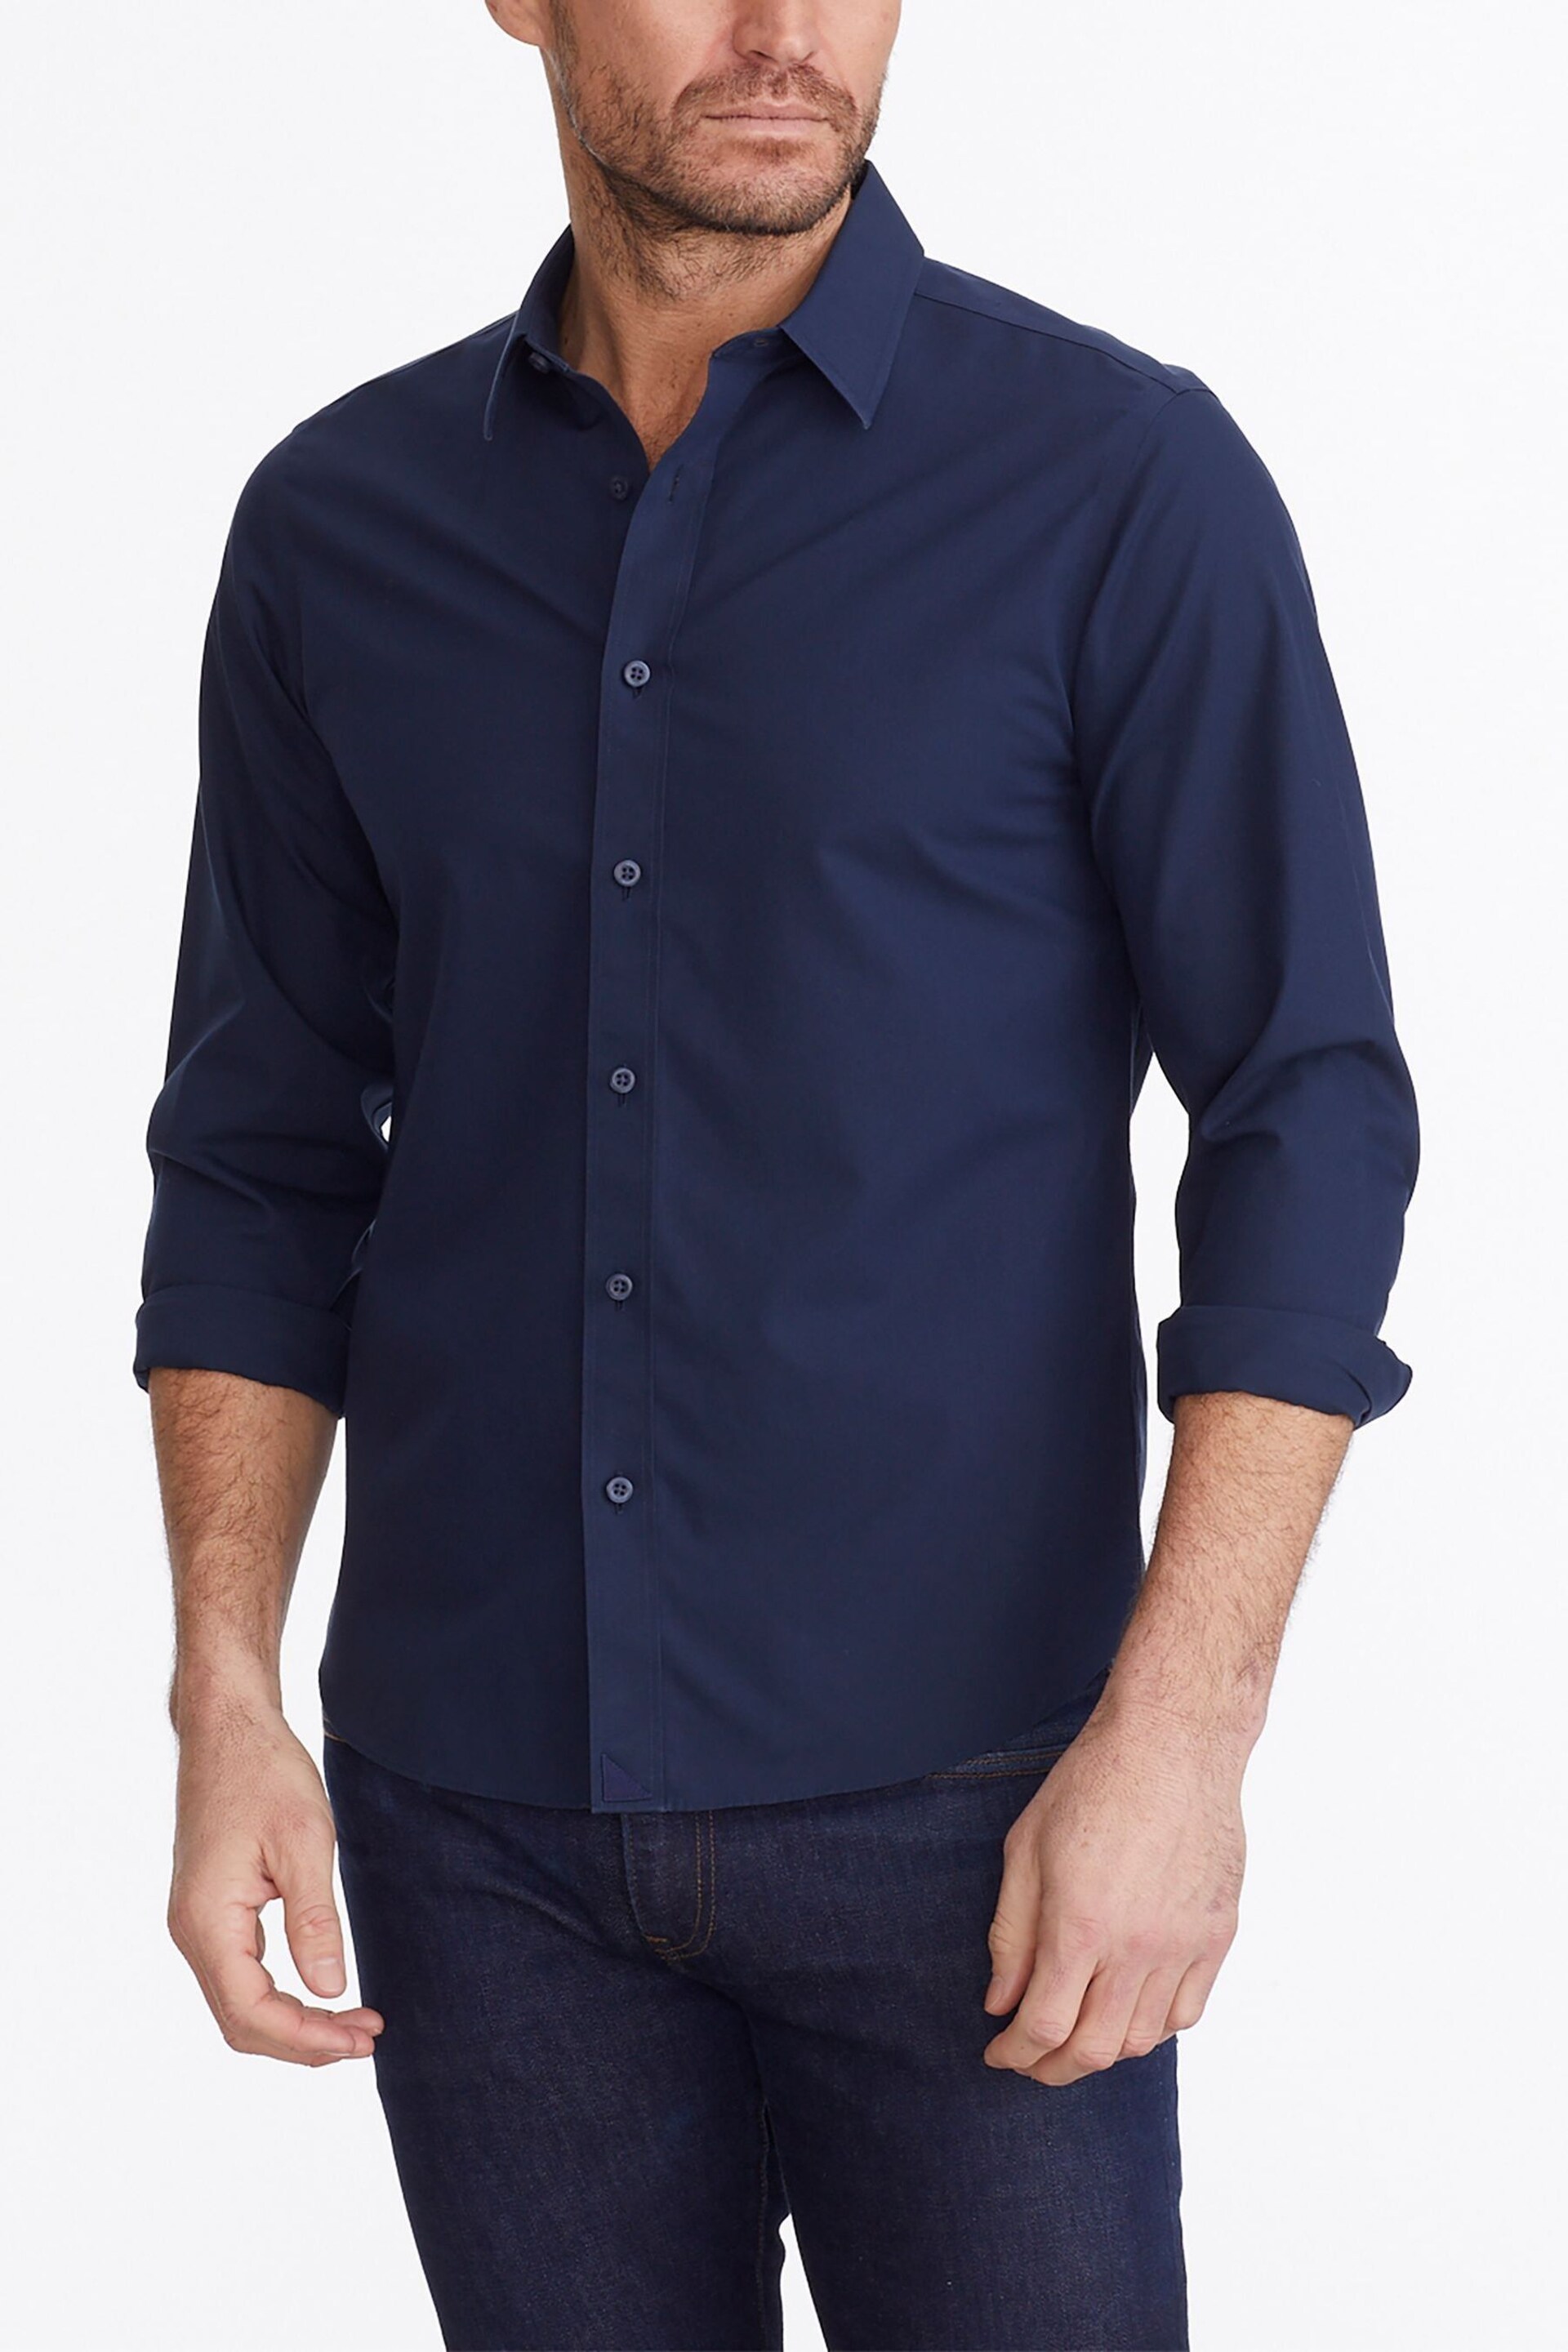 UNTUCKit Dark Blue Wrinkle-Free Relaxed Fit Castello Shirt - Image 4 of 6